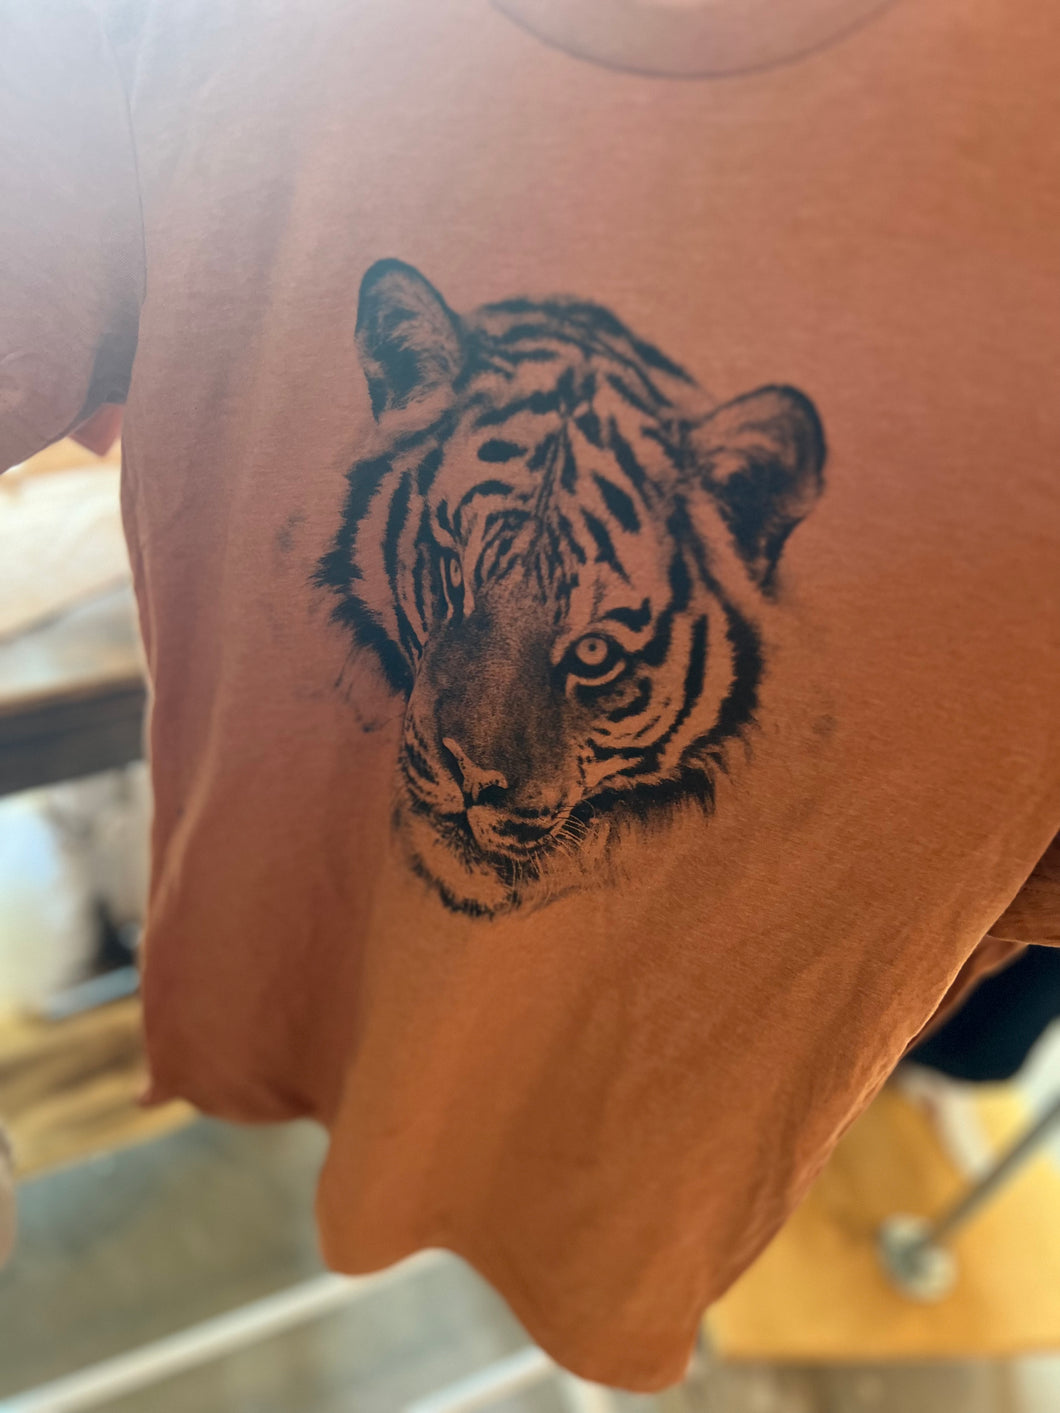 Tiger Graphic Tee